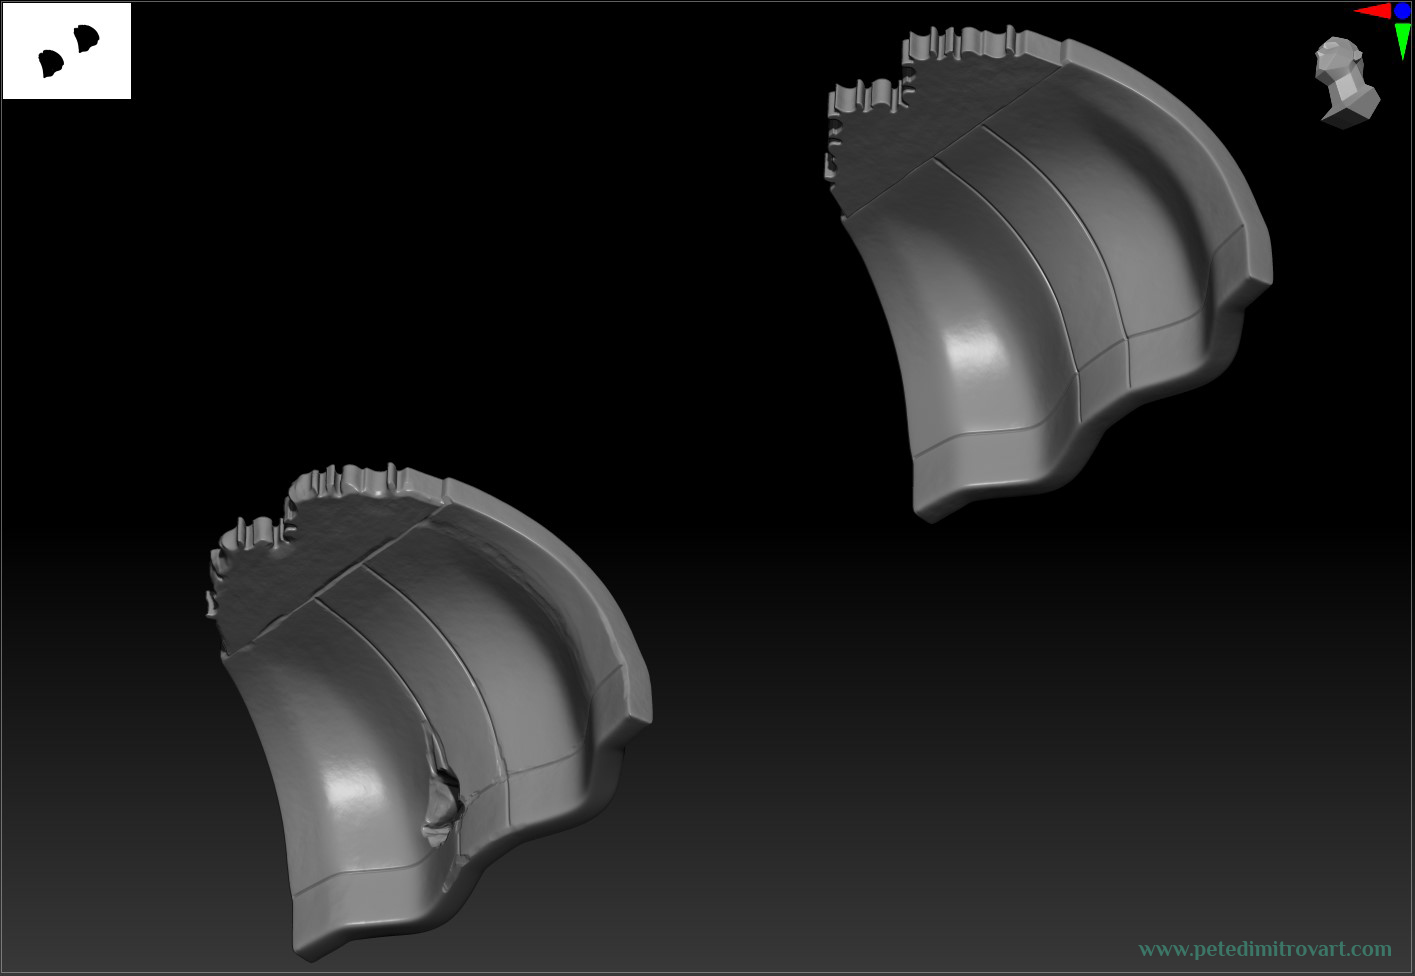 Lower, orthographic camera view of upper dome ceiling assets. Top parts has a fractal-like appearance. Lower dome bent has a crack and damage in one version, while the other (to the right) is intact. The images were taken inside Zbrush.